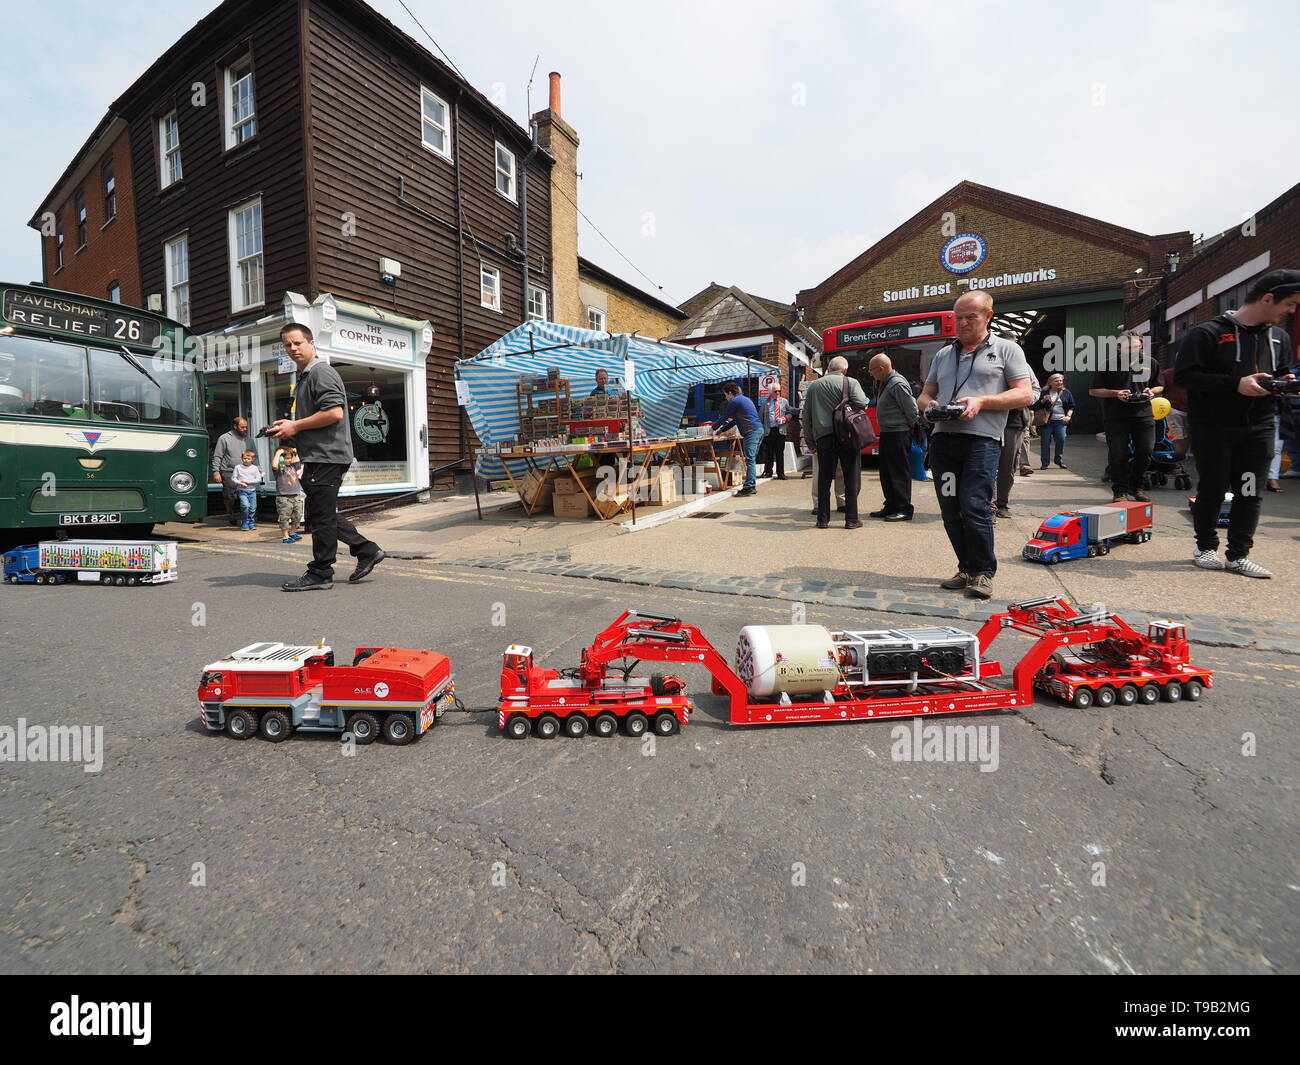 Faversham, Kent, UK. 18th May, 2019. 25th Faversham Transport Weekend: the first day of this annual transport festival show casing a range of vintage buses and commercial transport. Pic: remote control scale model trucks take to Faversham high street to the delight of visitors. Credit: James Bell/Alamy Live News Stock Photo